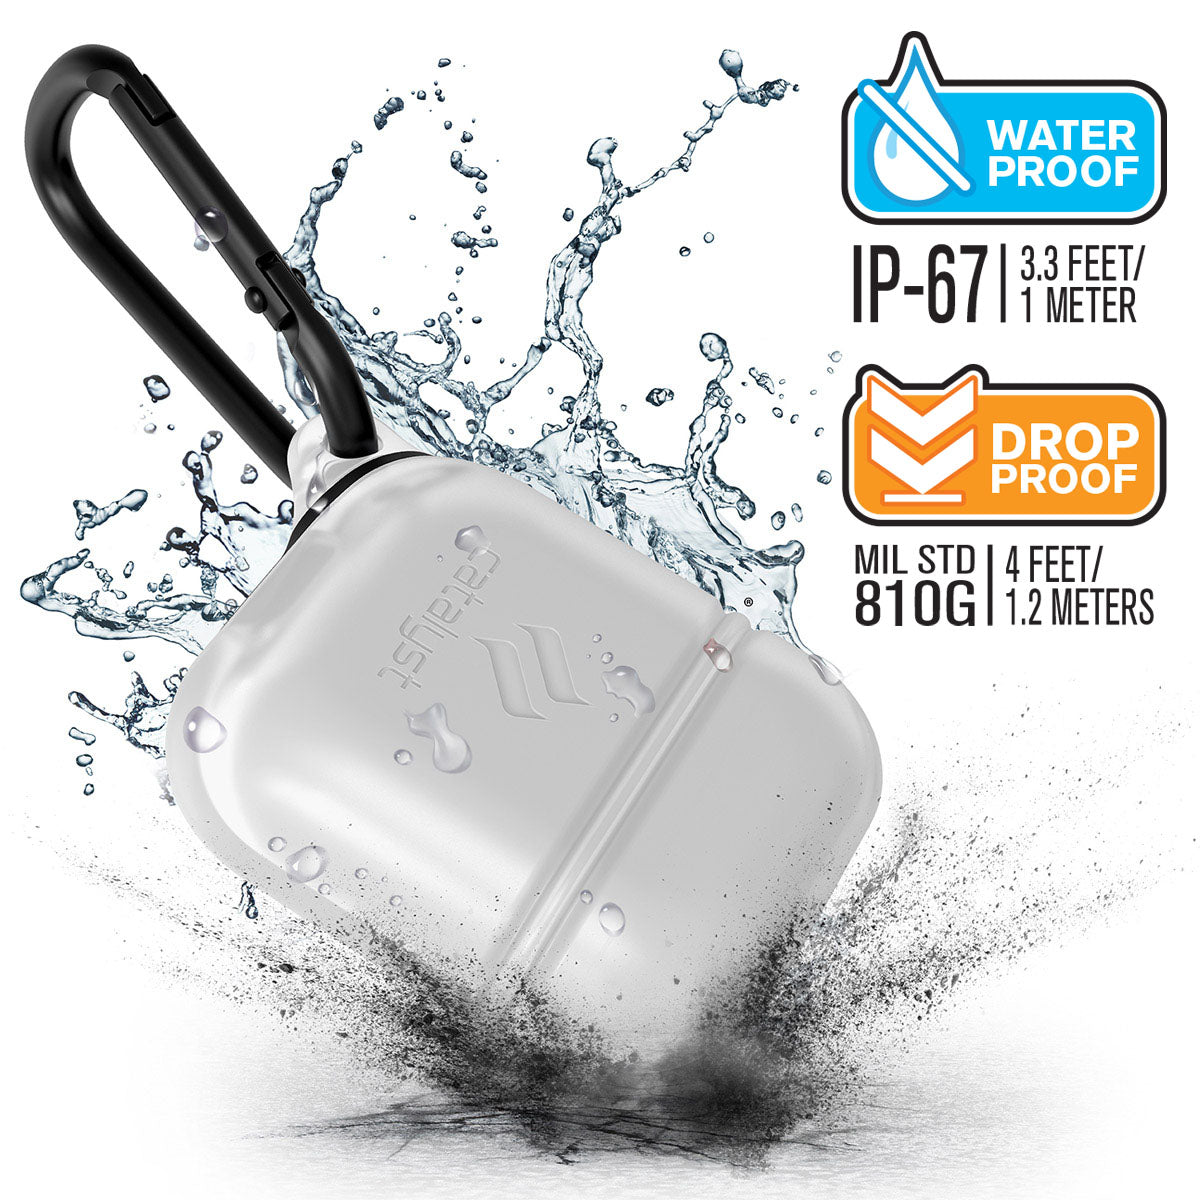 Catalyst airpods gen2/1 waterproof case + carabiner showing the case drop proof and water proof features with attached carabiner in frost white text reads water proof IP-67 3.3 FEET/1 METER DROP PROOF MIL STD 810G 1.2 METERS